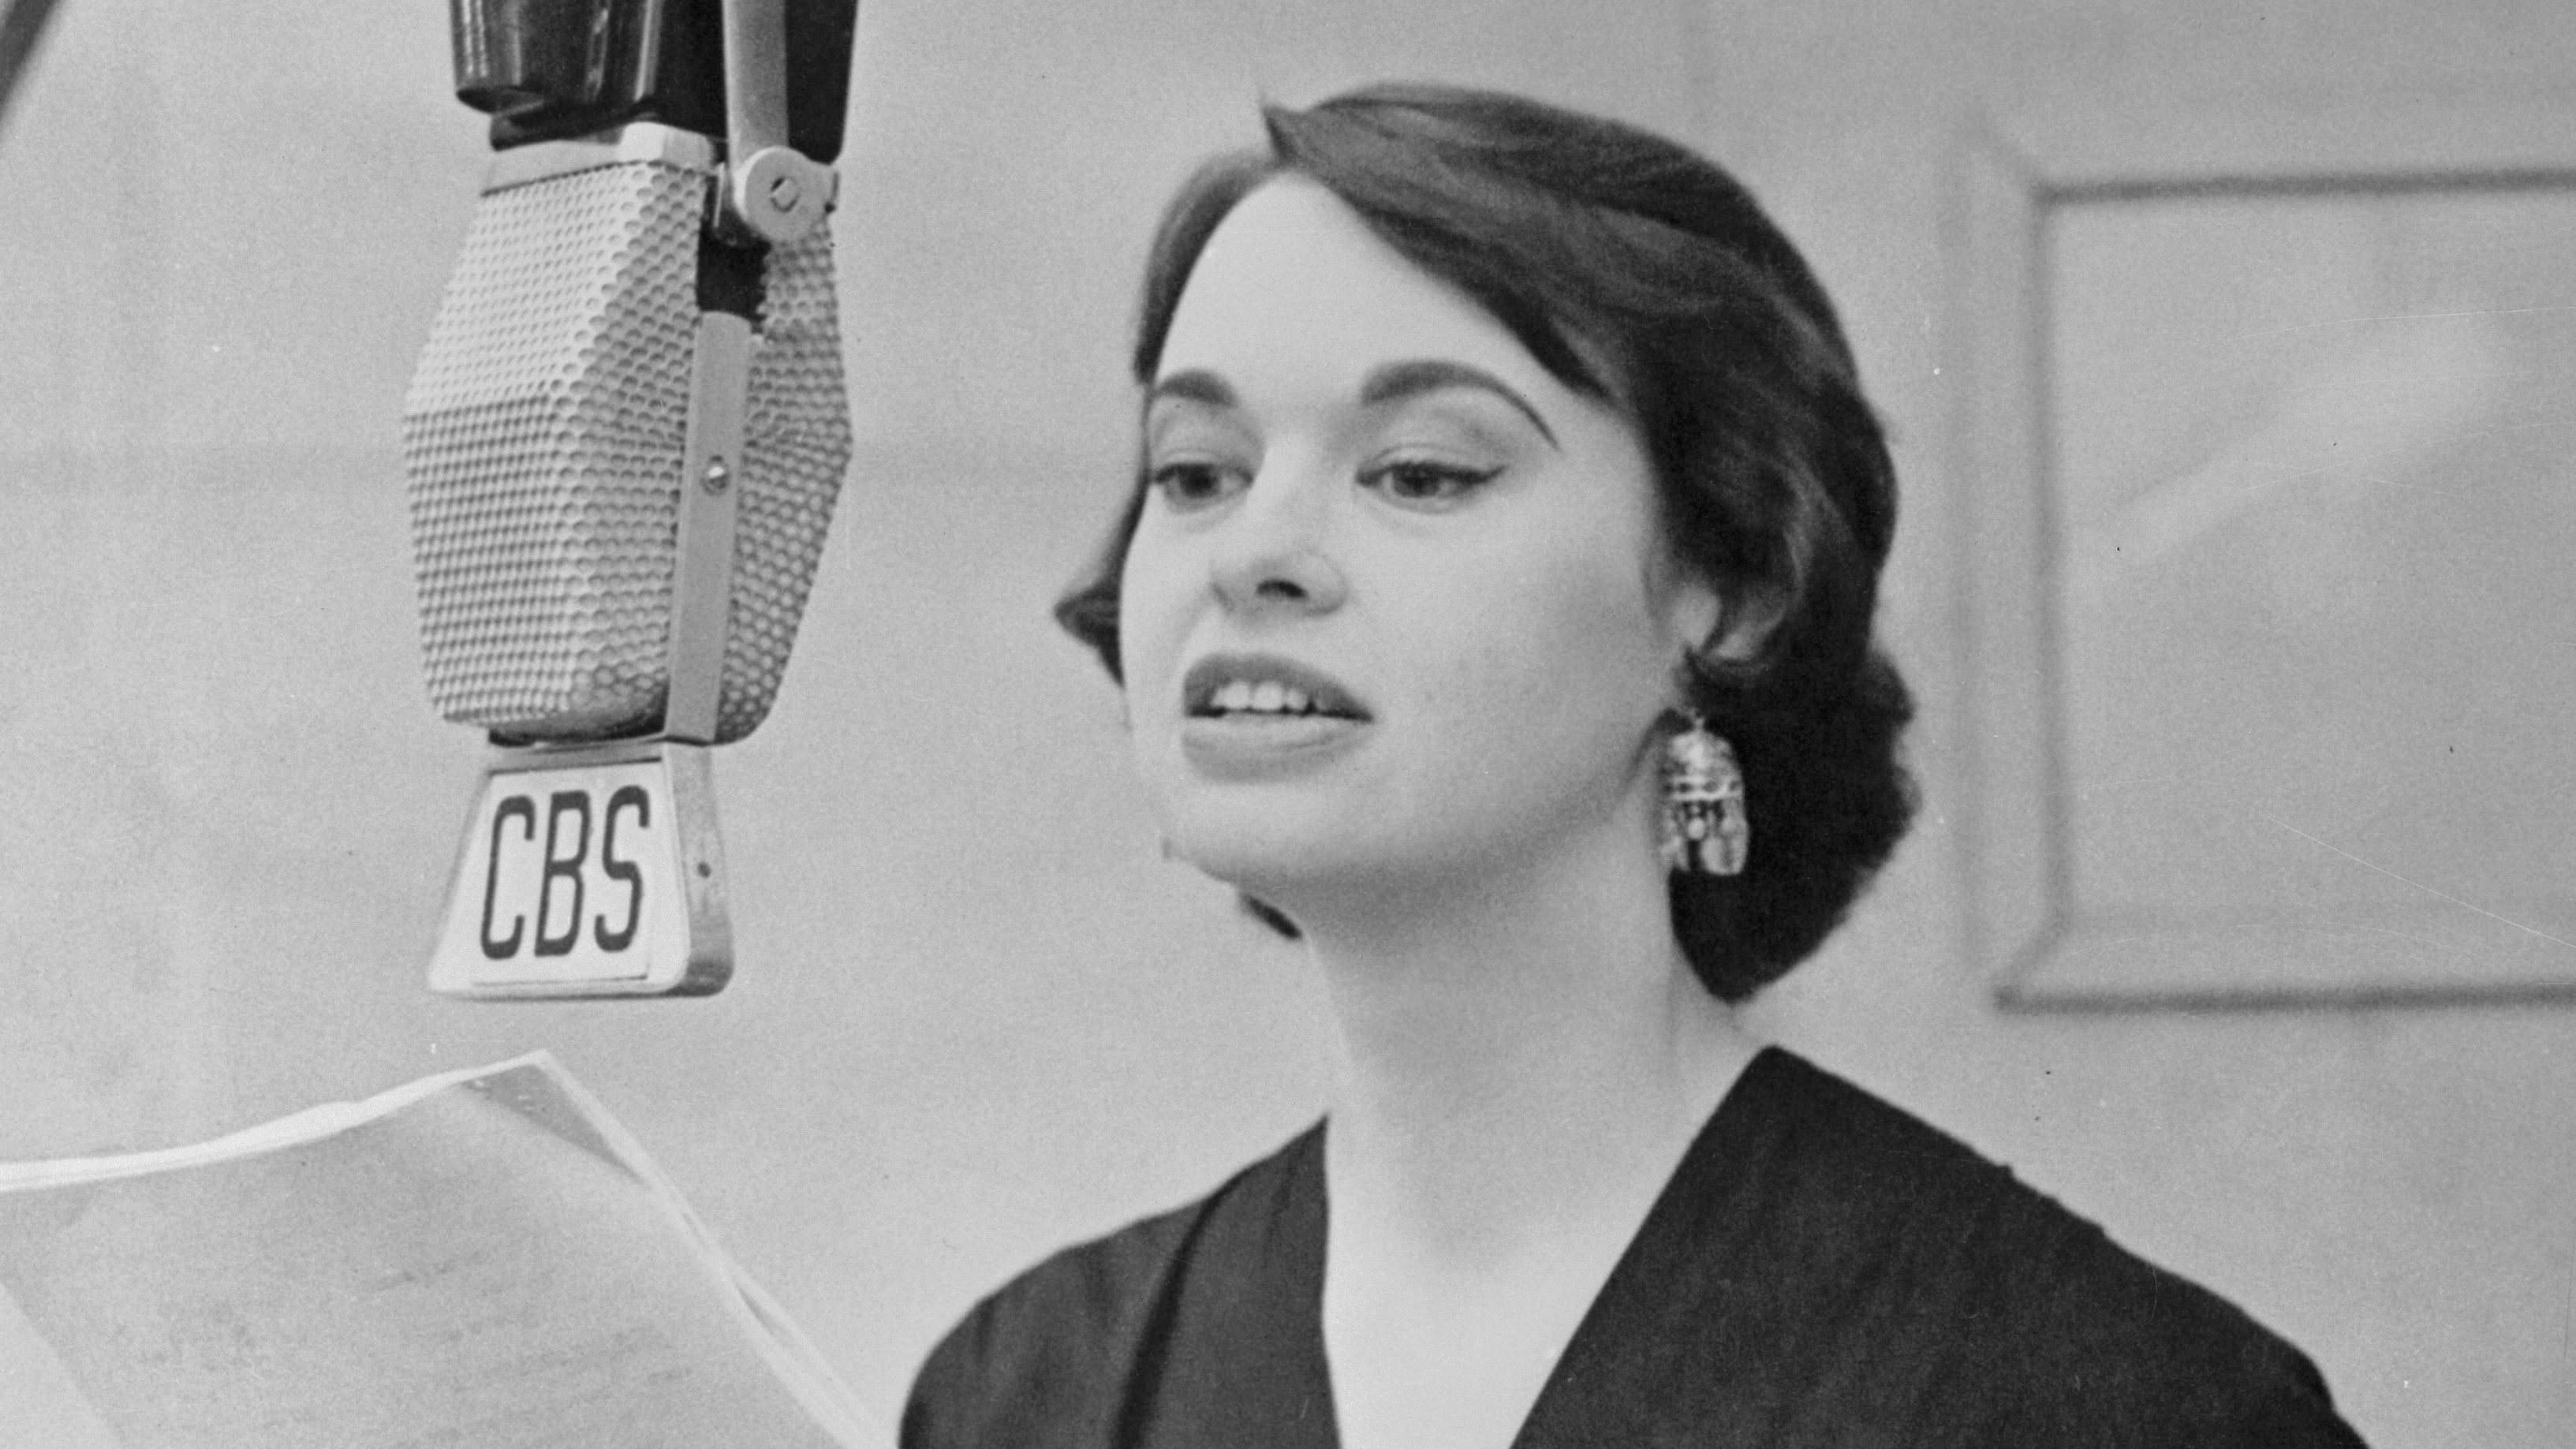 Vanderbilt discusses her poetry on CBS Radio's "The Music Room" in the 1950s. She published "Love Poems" in 1955.